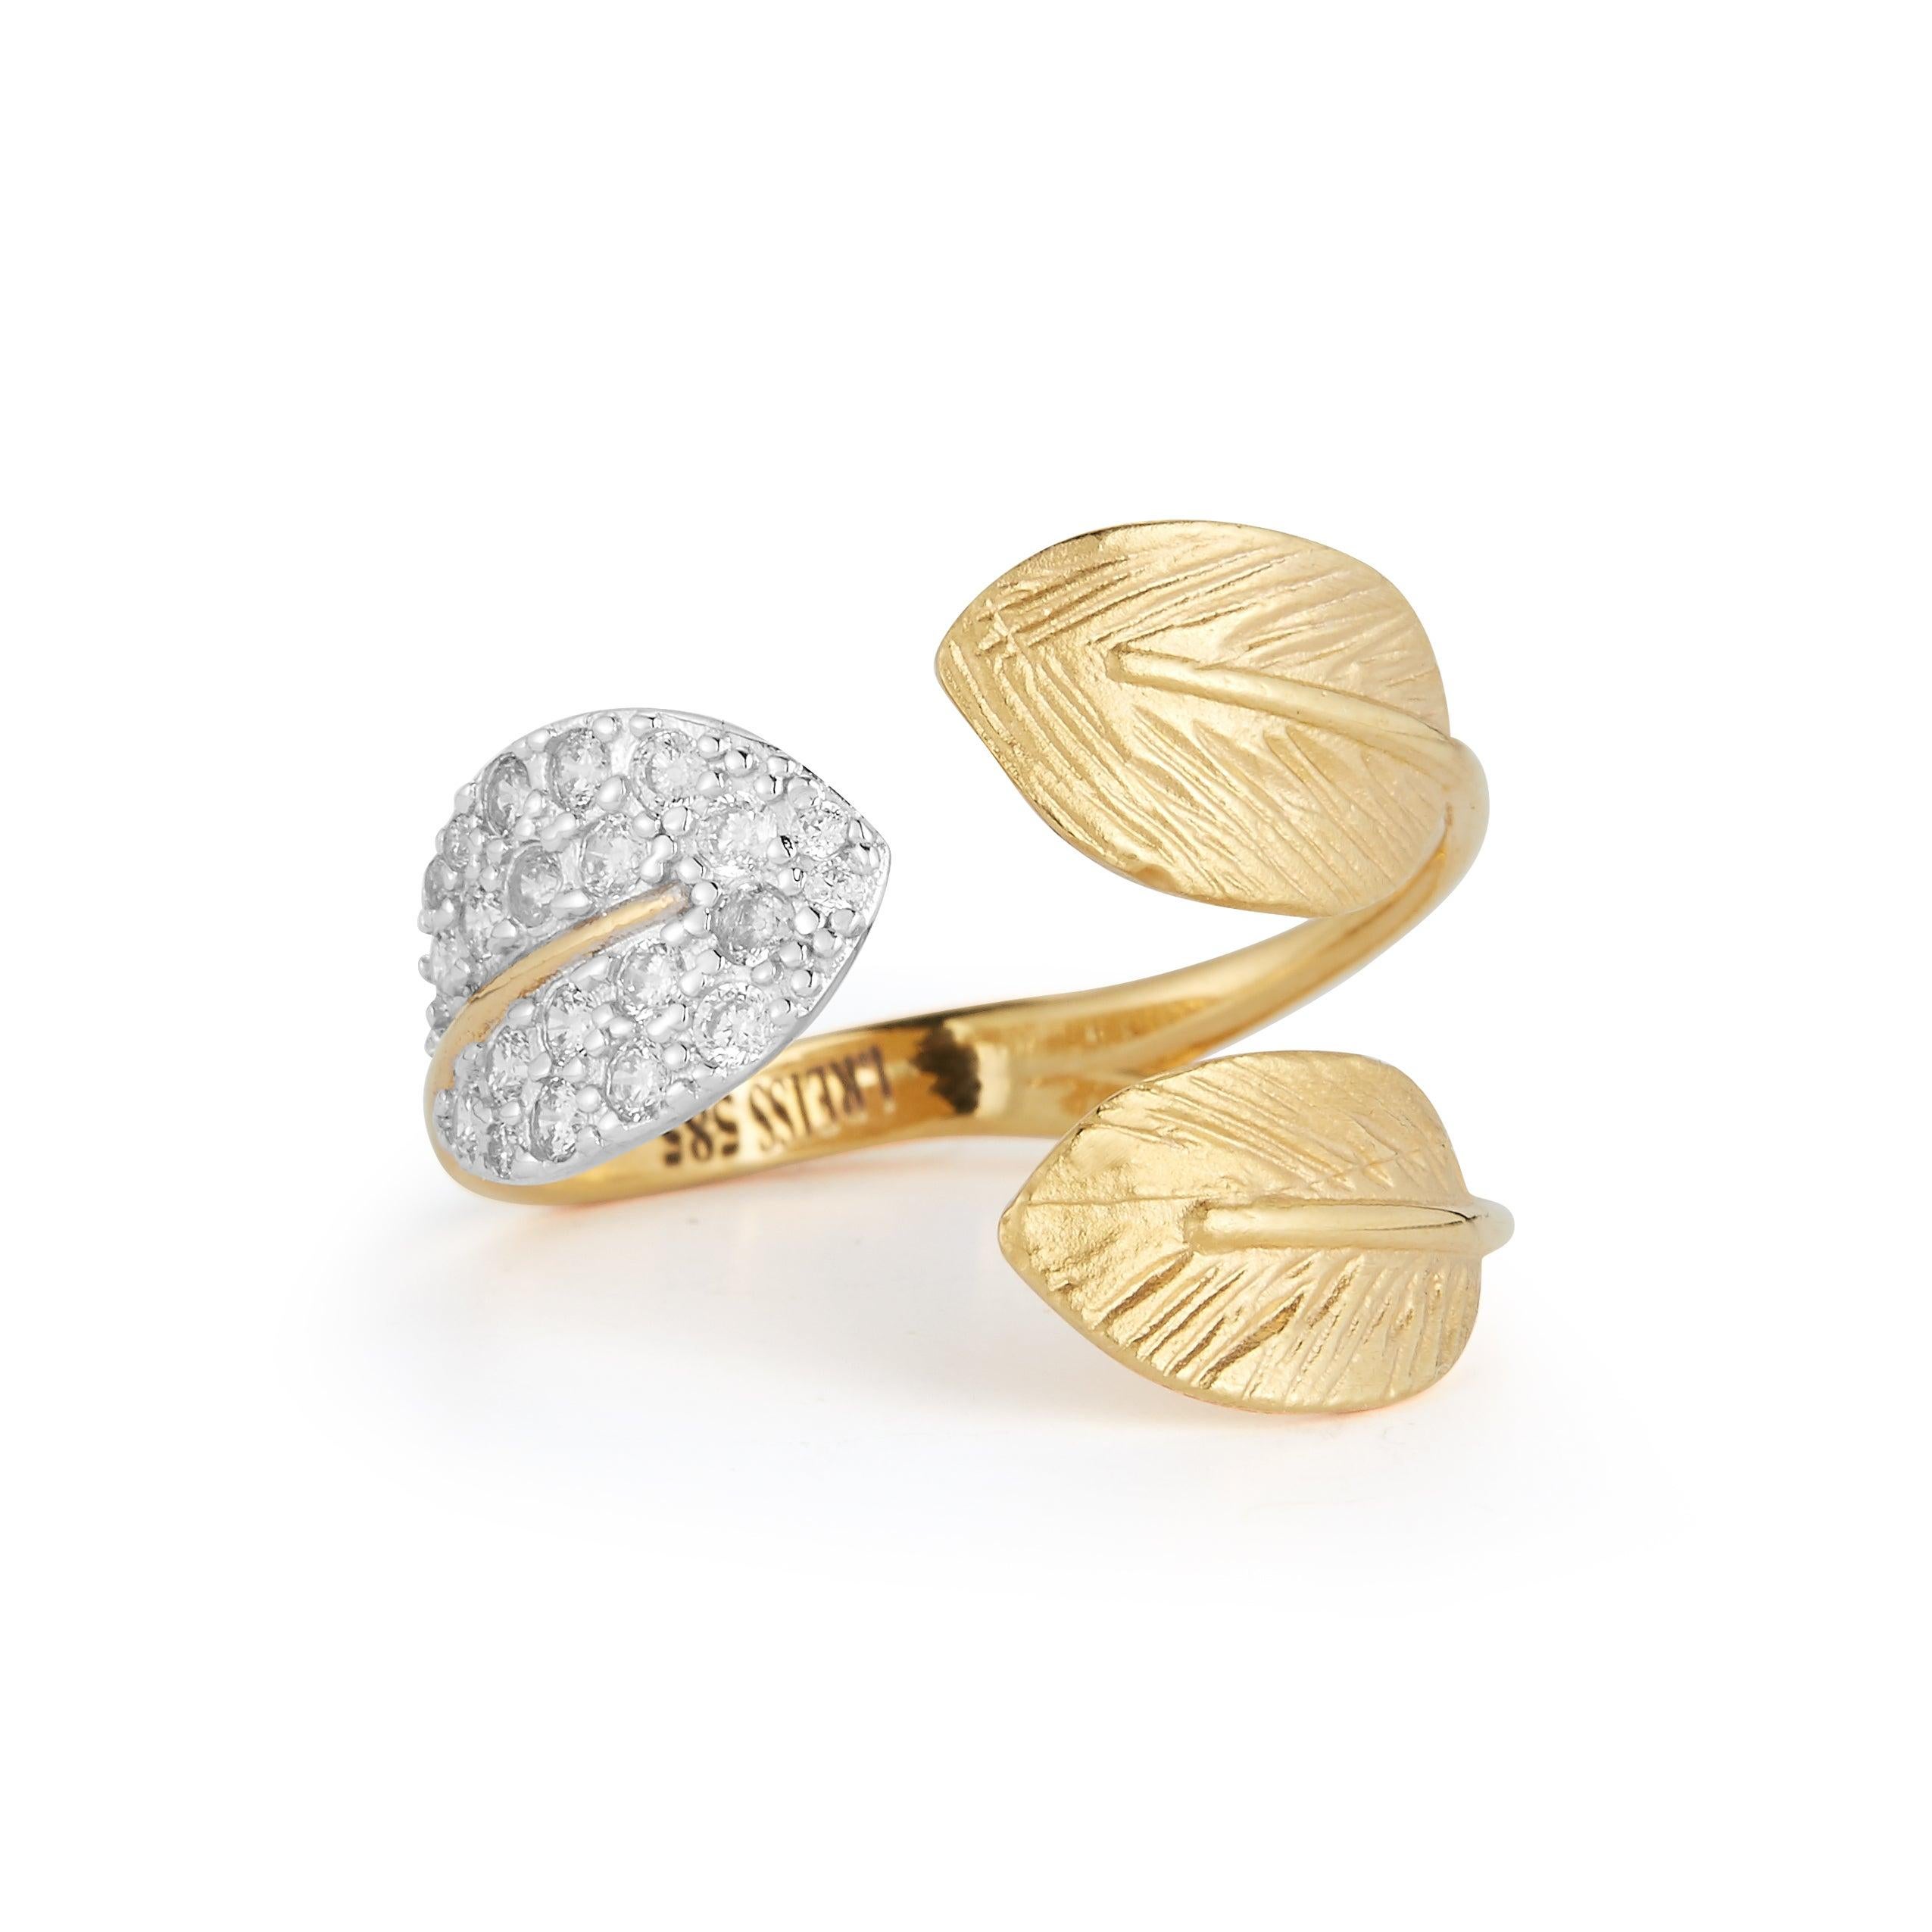 For Sale:  Handcrafted 14 Karat Yellow Gold 3-Leaf Ring 2